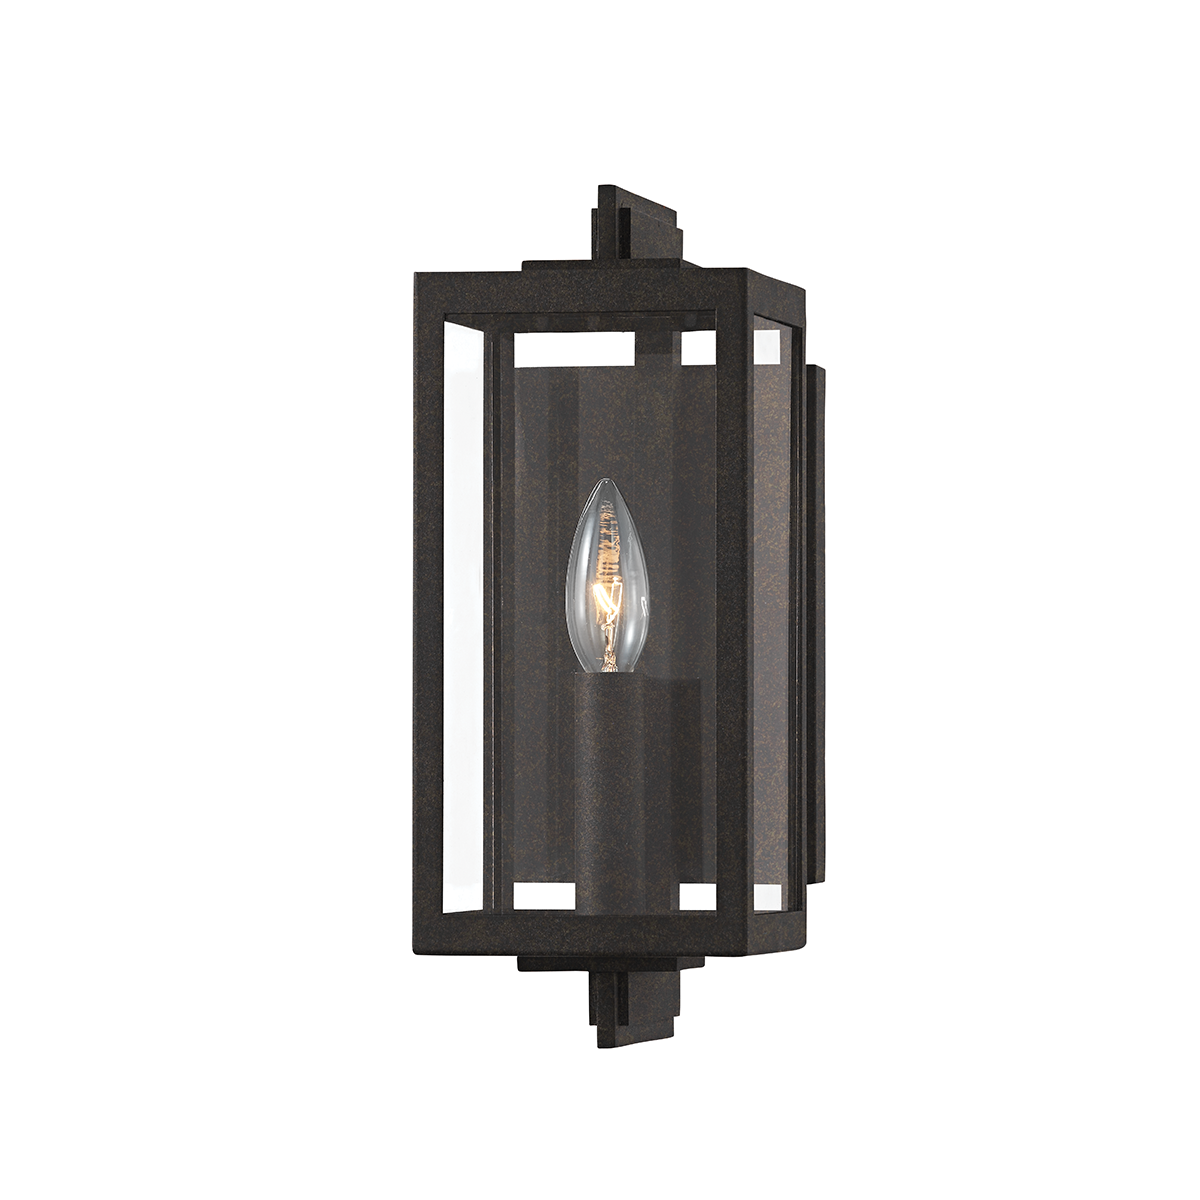 Troy NICO 1 LIGHT EXTERIOR WALL SCONCE B5511 Outdoor l Wall Troy Lighting   